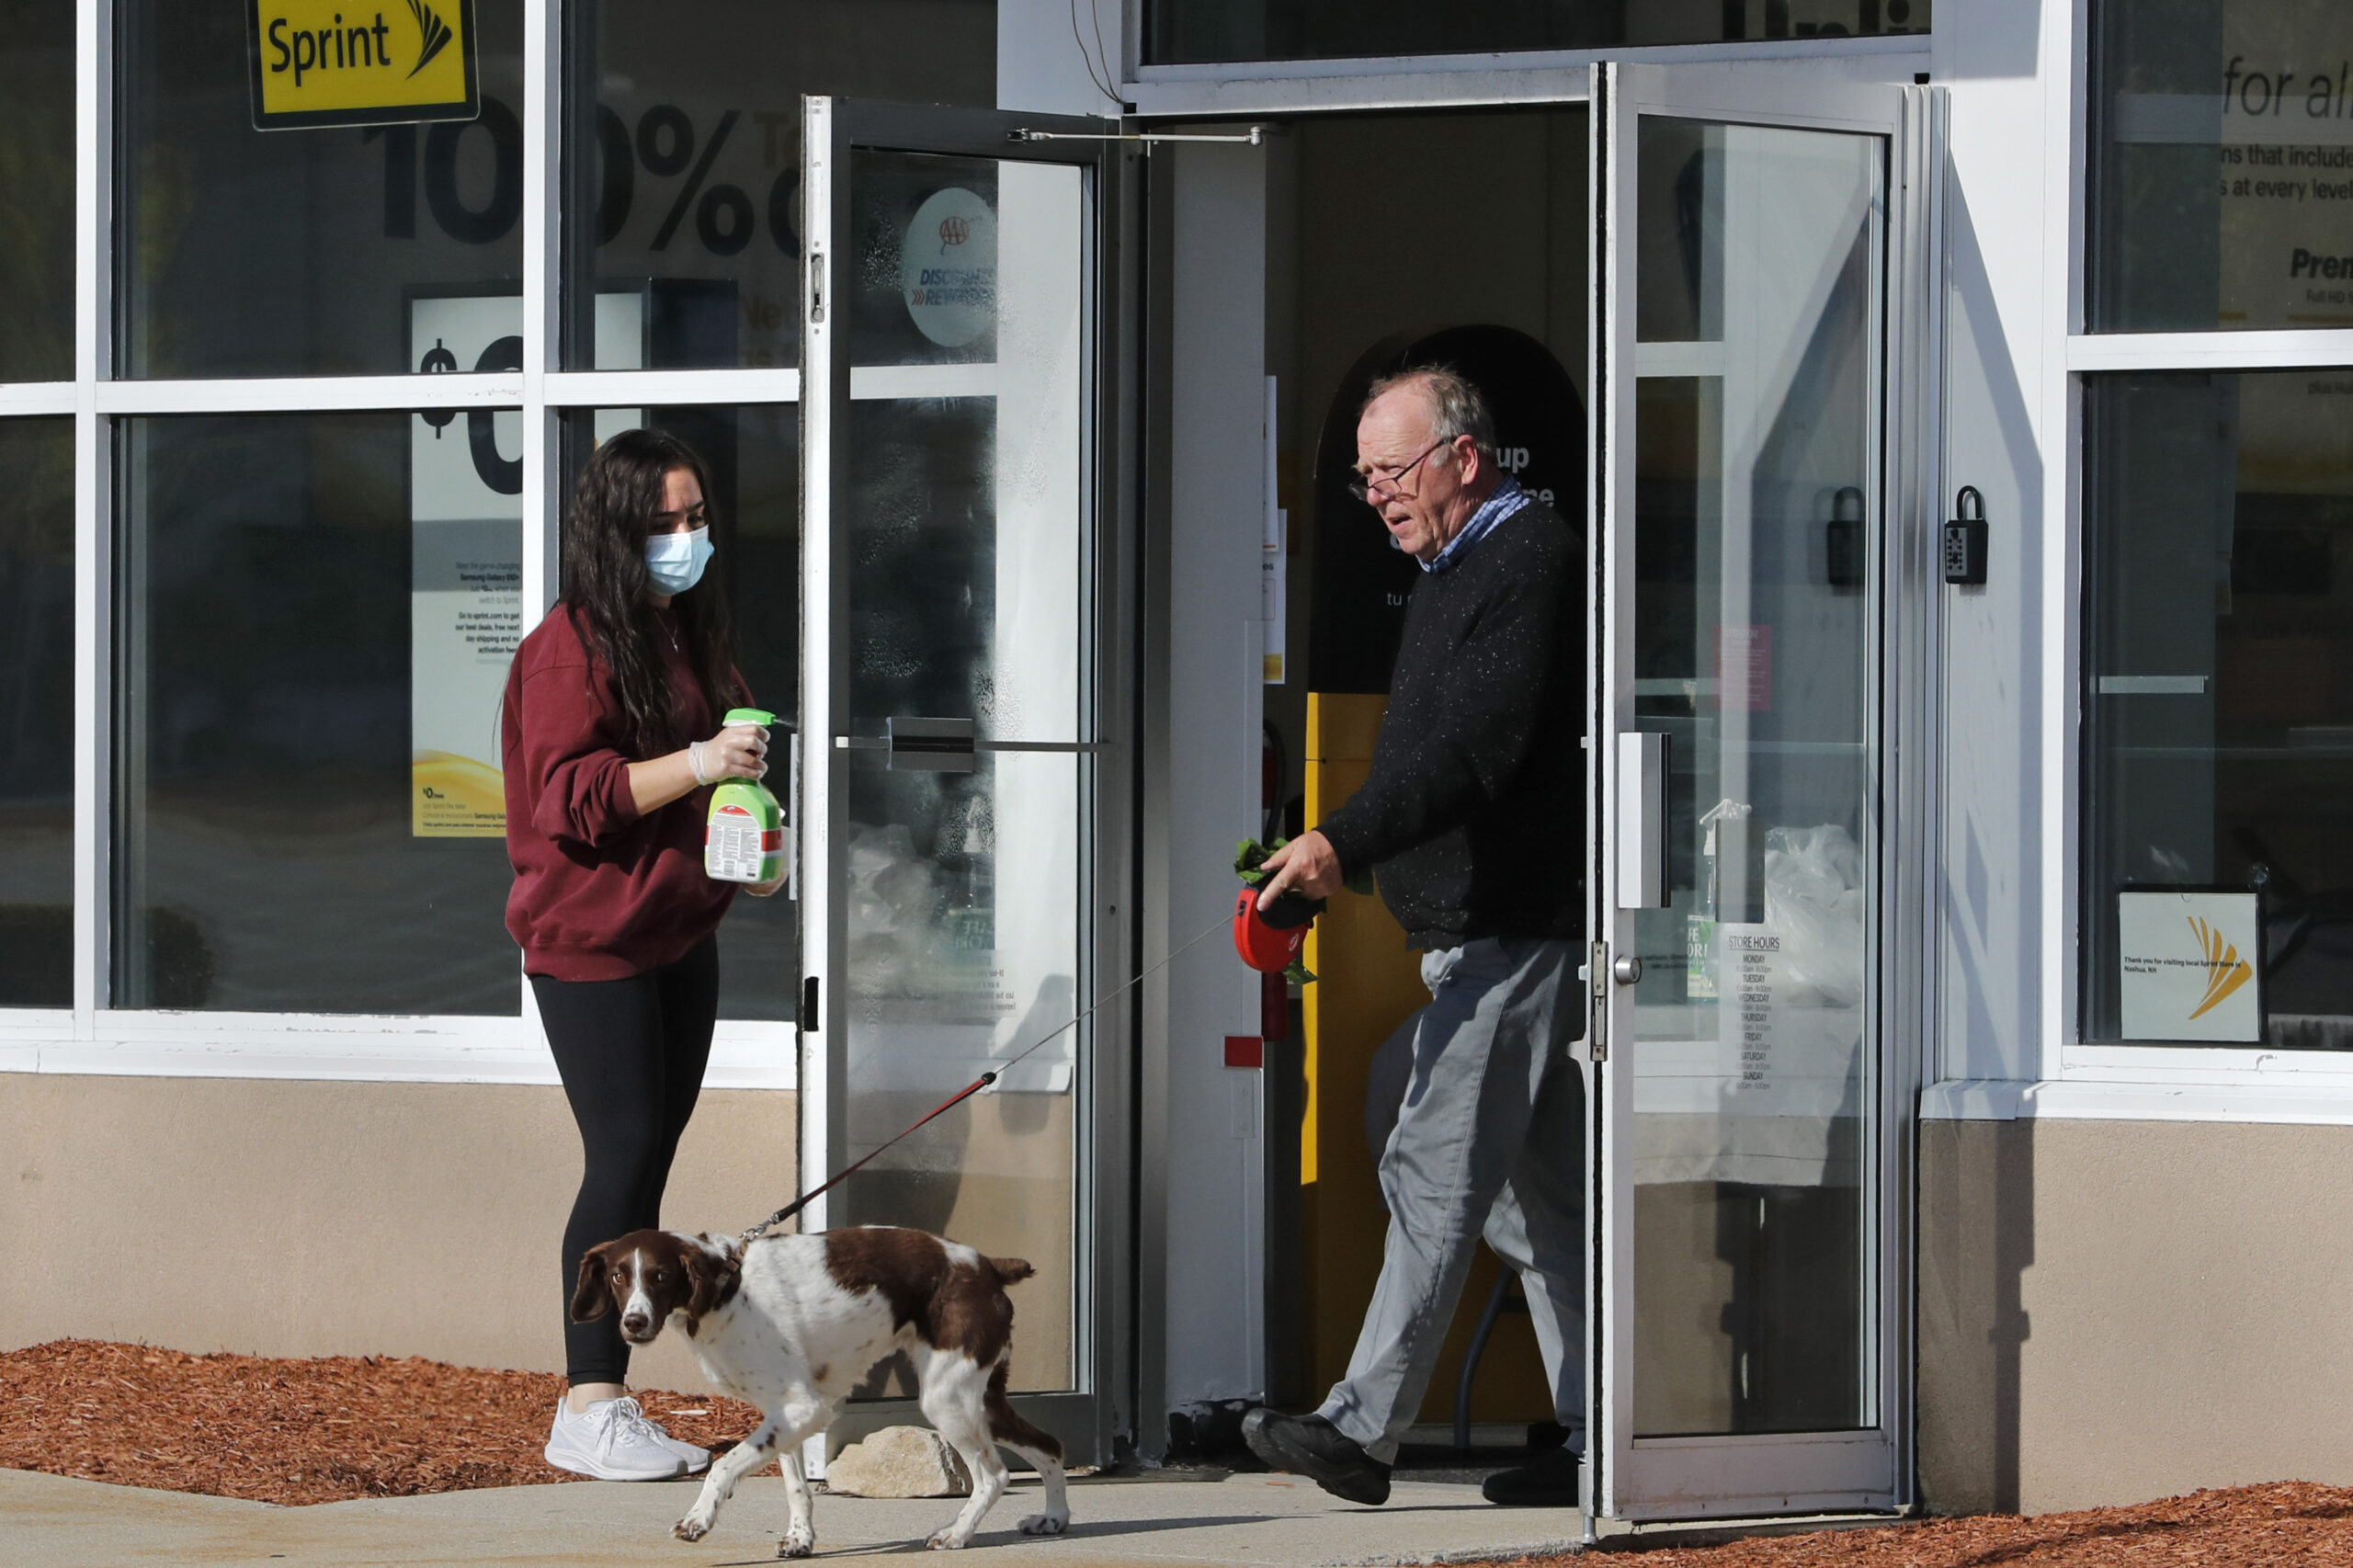 A masked worker a Sprint mobile phone store sanitizes a door as an unmasked customer walks a dog out of the store